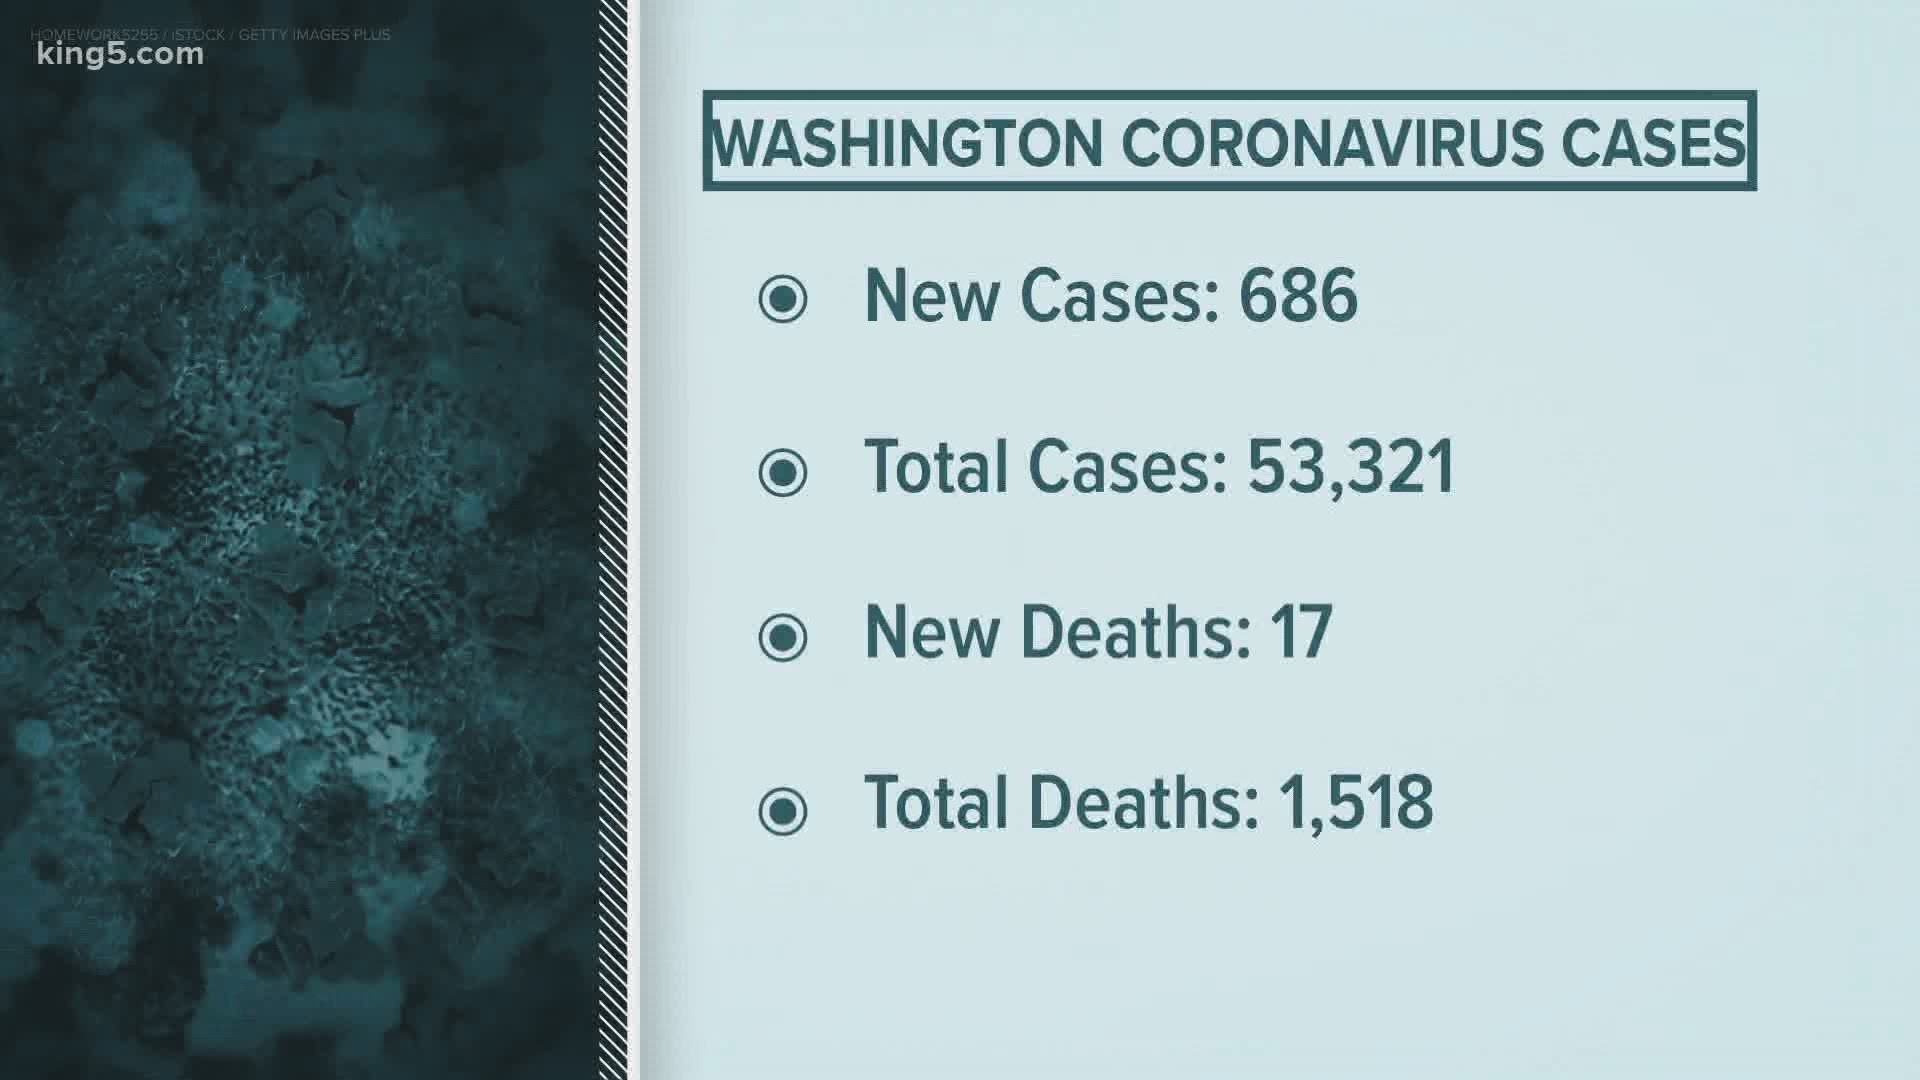 Continuing coverage of the coronavirus pandemic in Washington on Monday, July 27 at 5 p.m.